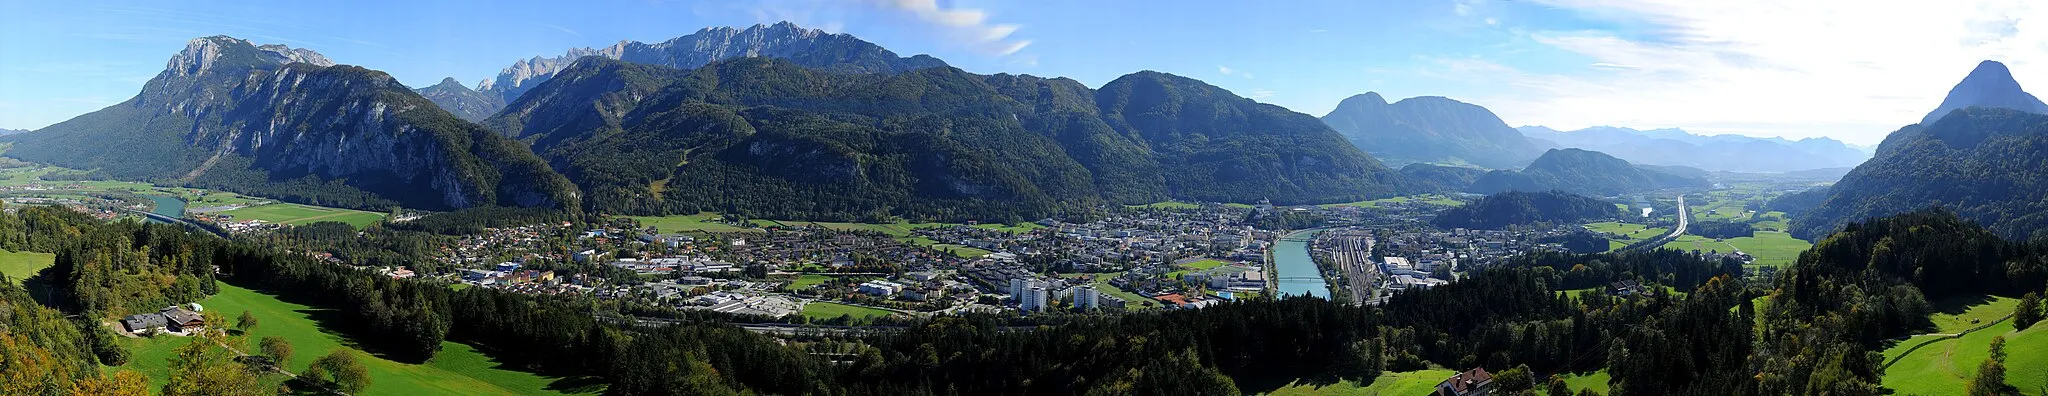 Photo showing: View from Thierberg over Kufstein and Wilder Kaiser.
Full Resolution image (275.044x53.145) is available at http://www.gpix.at/Gpix.at-Gigapixel_gpath,kufstein,pid,9112.html.